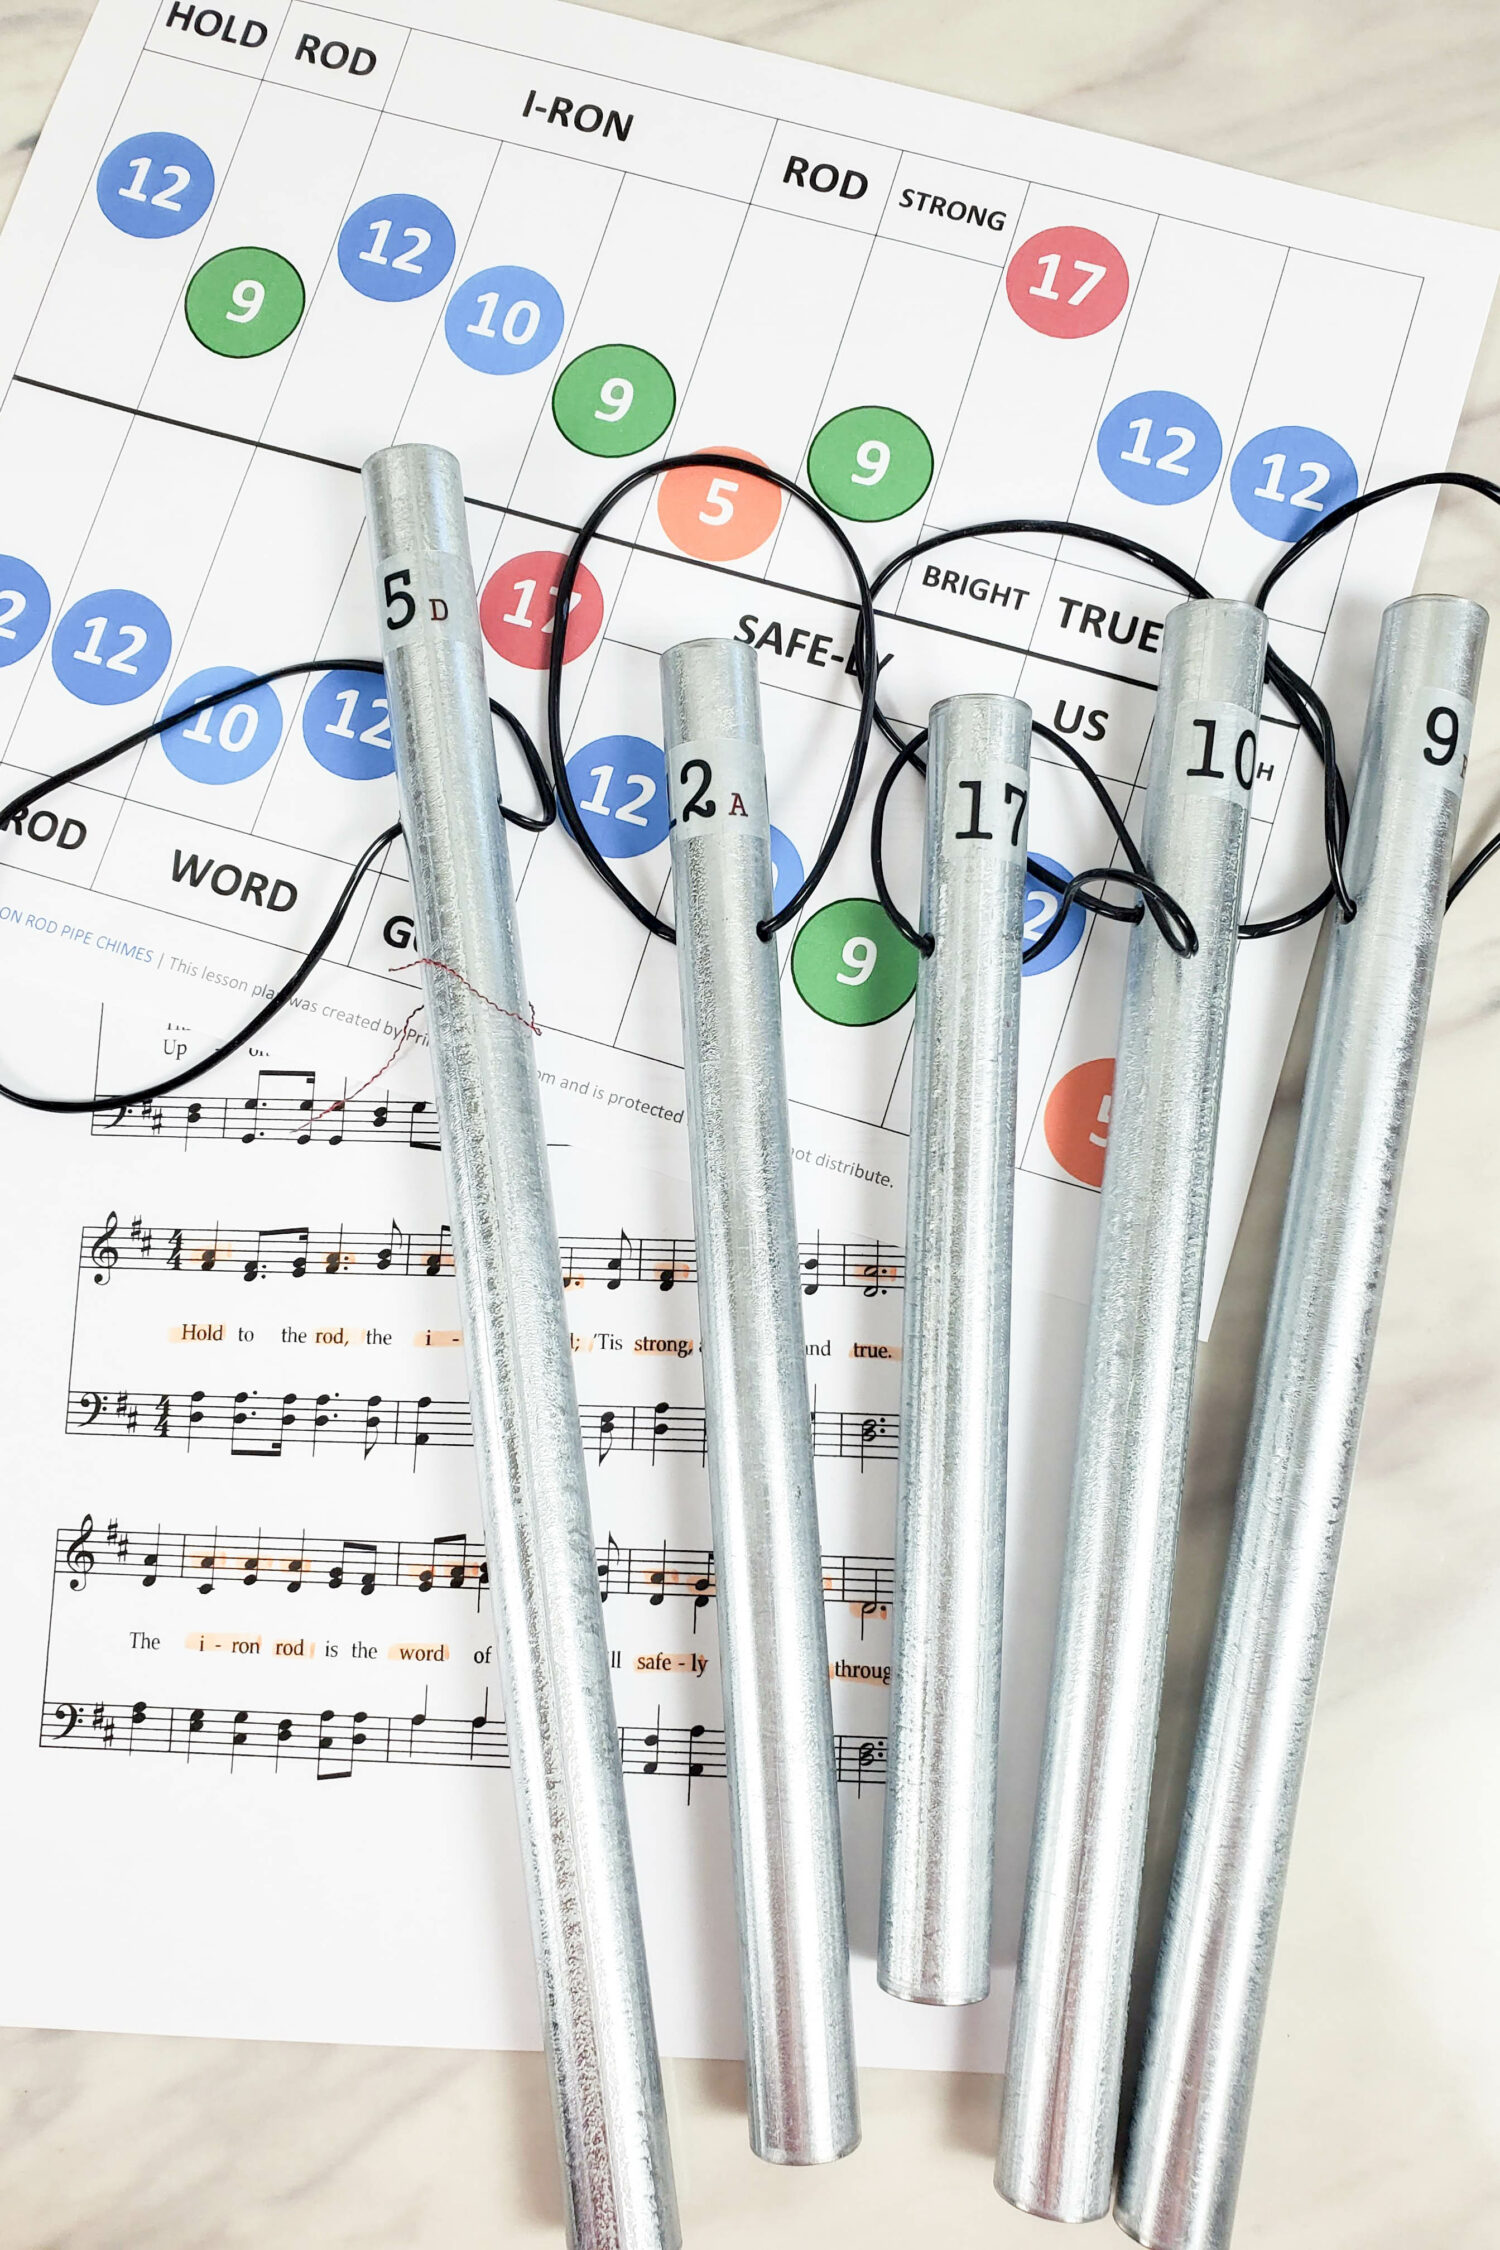 The Iron Rod Pipe Chimes chart singing time idea! Head over to grab this printable chime charts to help teach the hymn The Iron Rod in your Primary room! Great tie in to the theme of the song with these metal pipe chimes as an engaging activity for your kiddos.